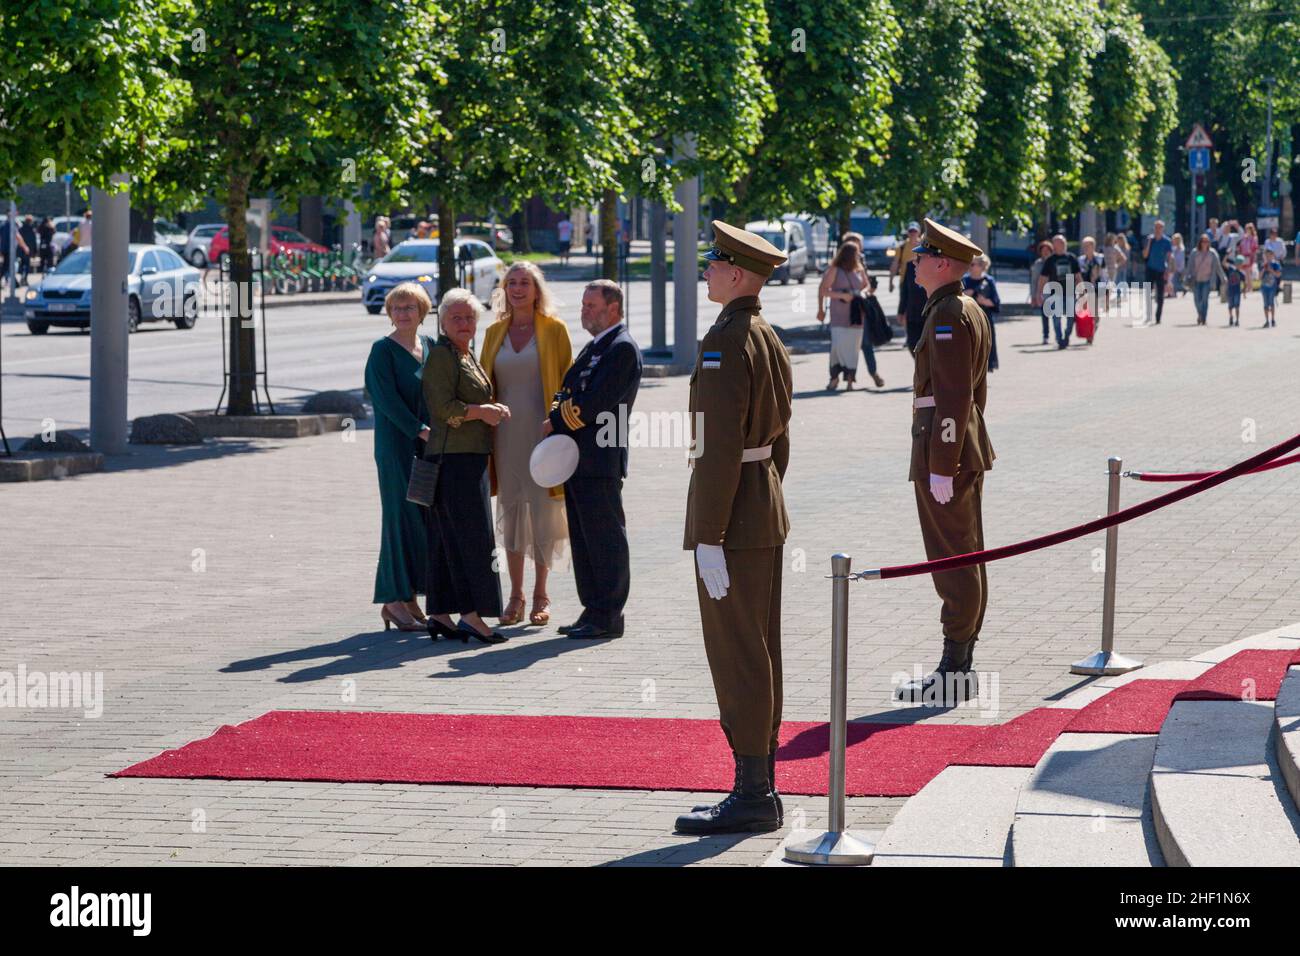 Tallinn, Estonia - June 15 2019: Soldiers at the entrance of the Estonia Theatre for an official visit of the Estonian President and the Danish Queen Stock Photo